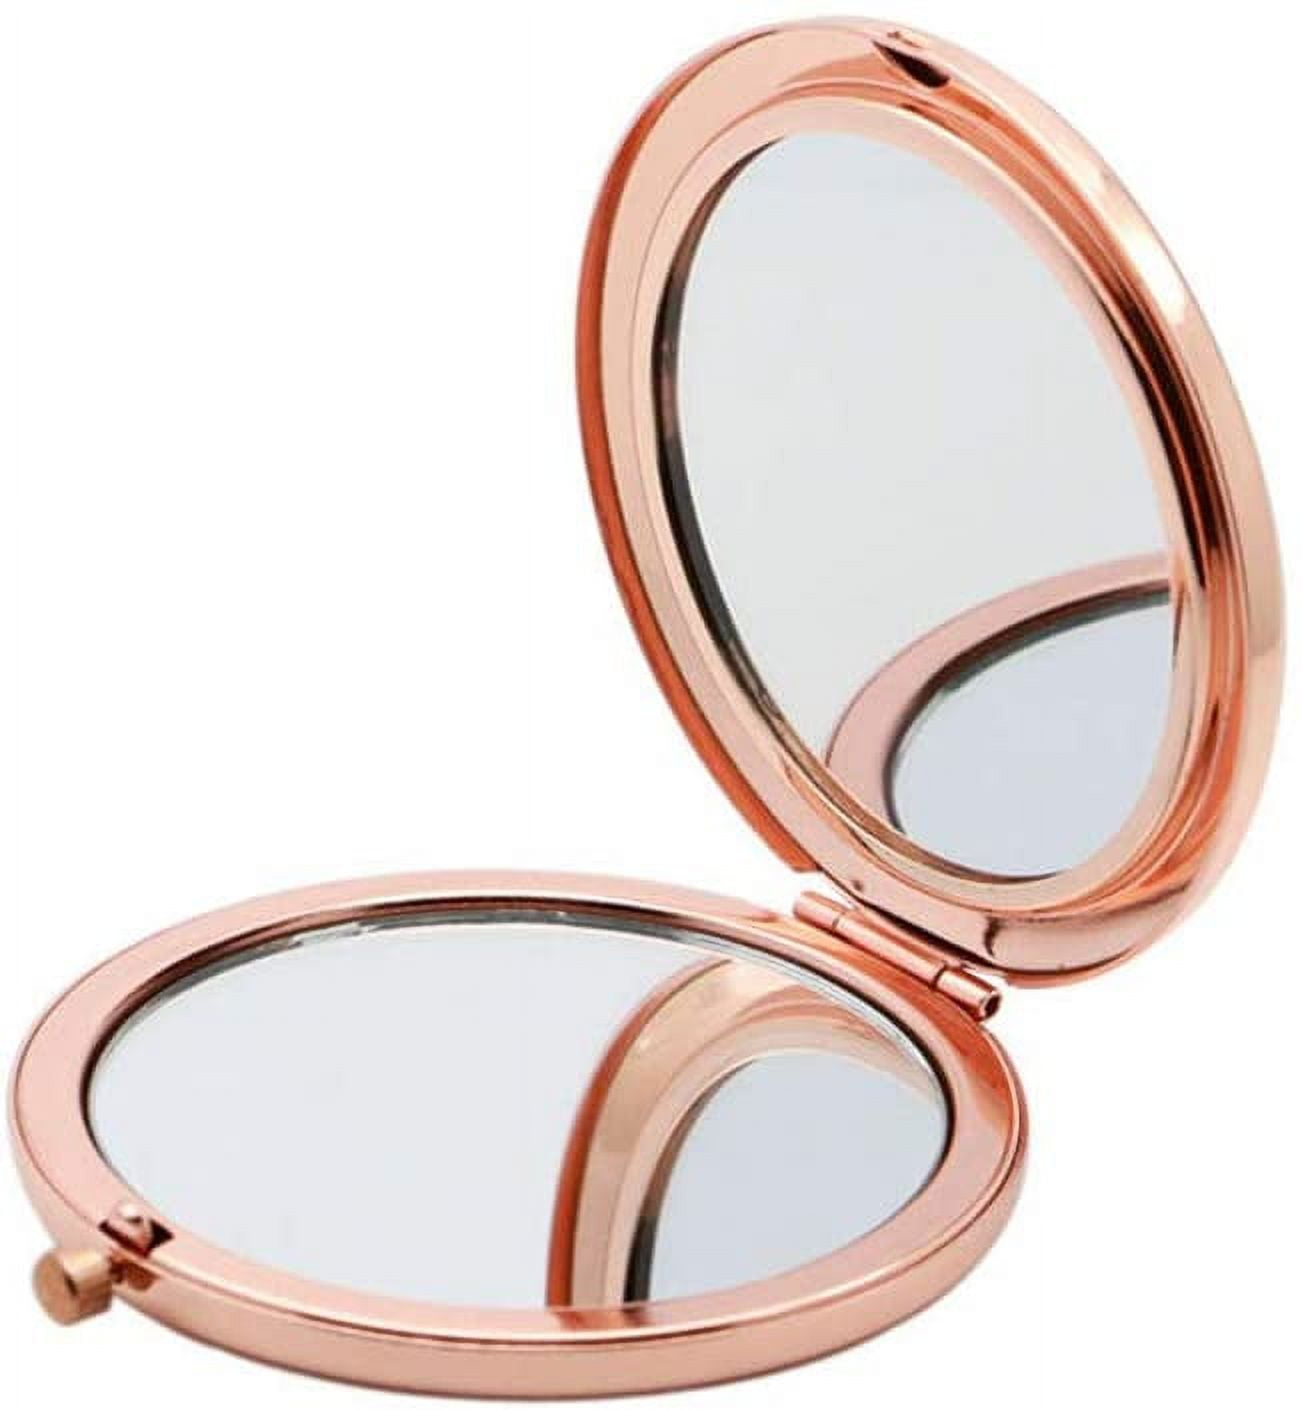 Magnifying Compact Mirror for Purses ,Folding Mini Pocket Double Sided  Travel Makeup Mirror,Perfect for Purse, Pocket and Travel